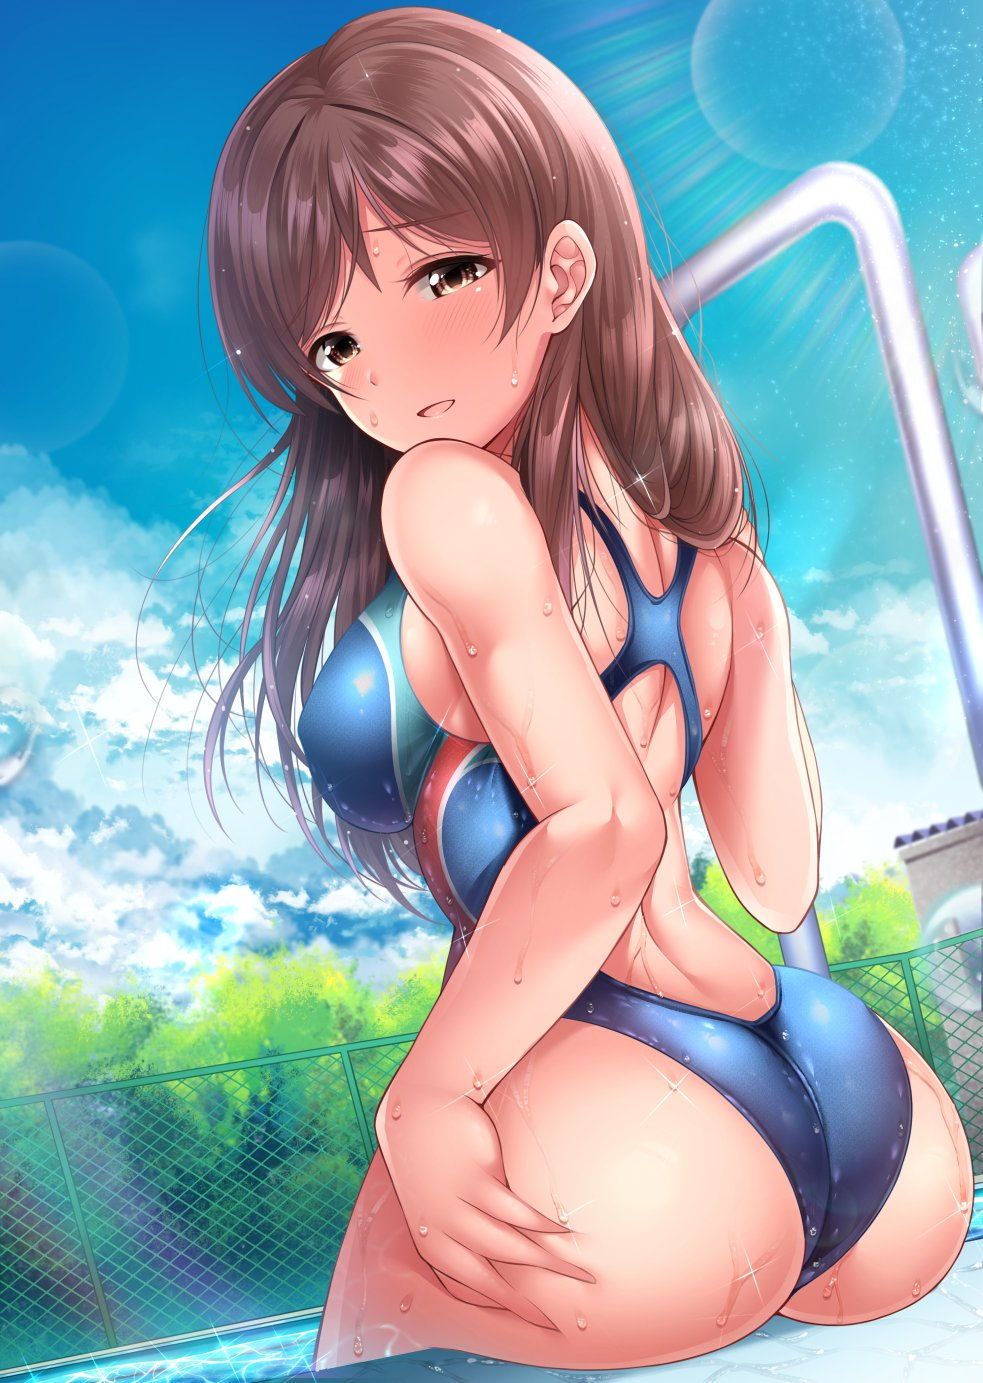 People who want to see erotic pictures of Swimsuit! 5